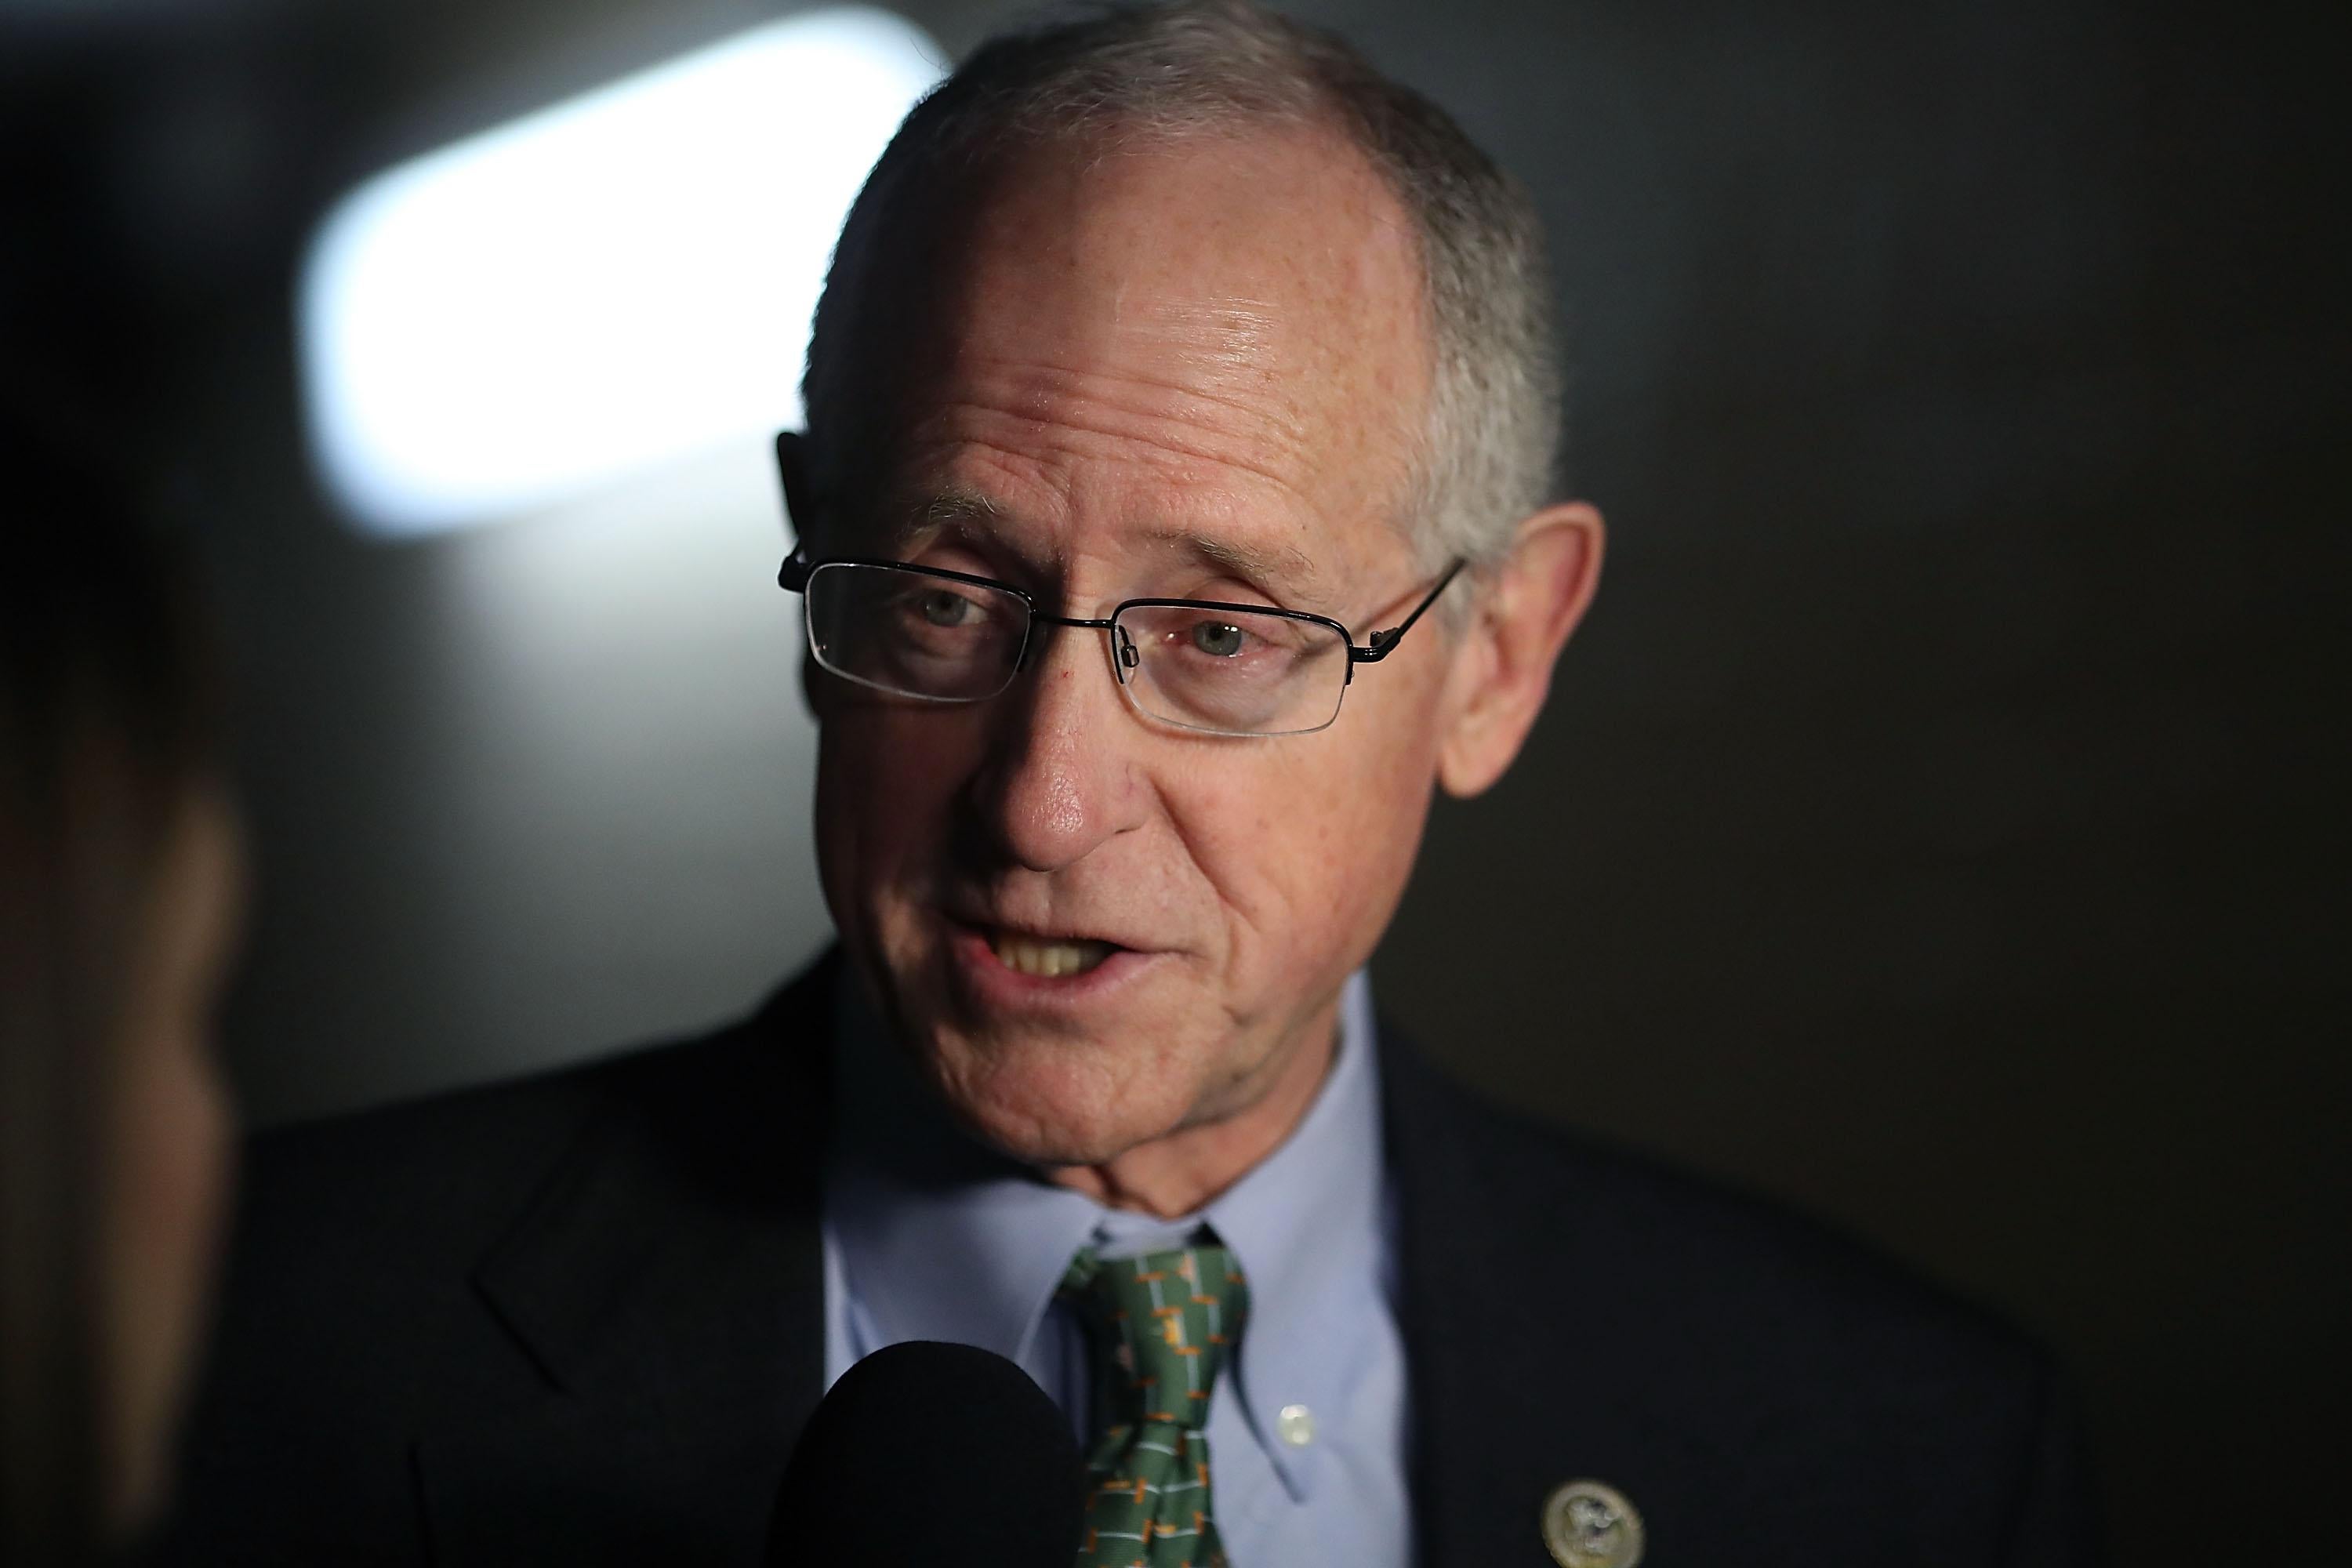 Rep. Mike Conaway speaks to the media after attending a meeting with House GOP members.